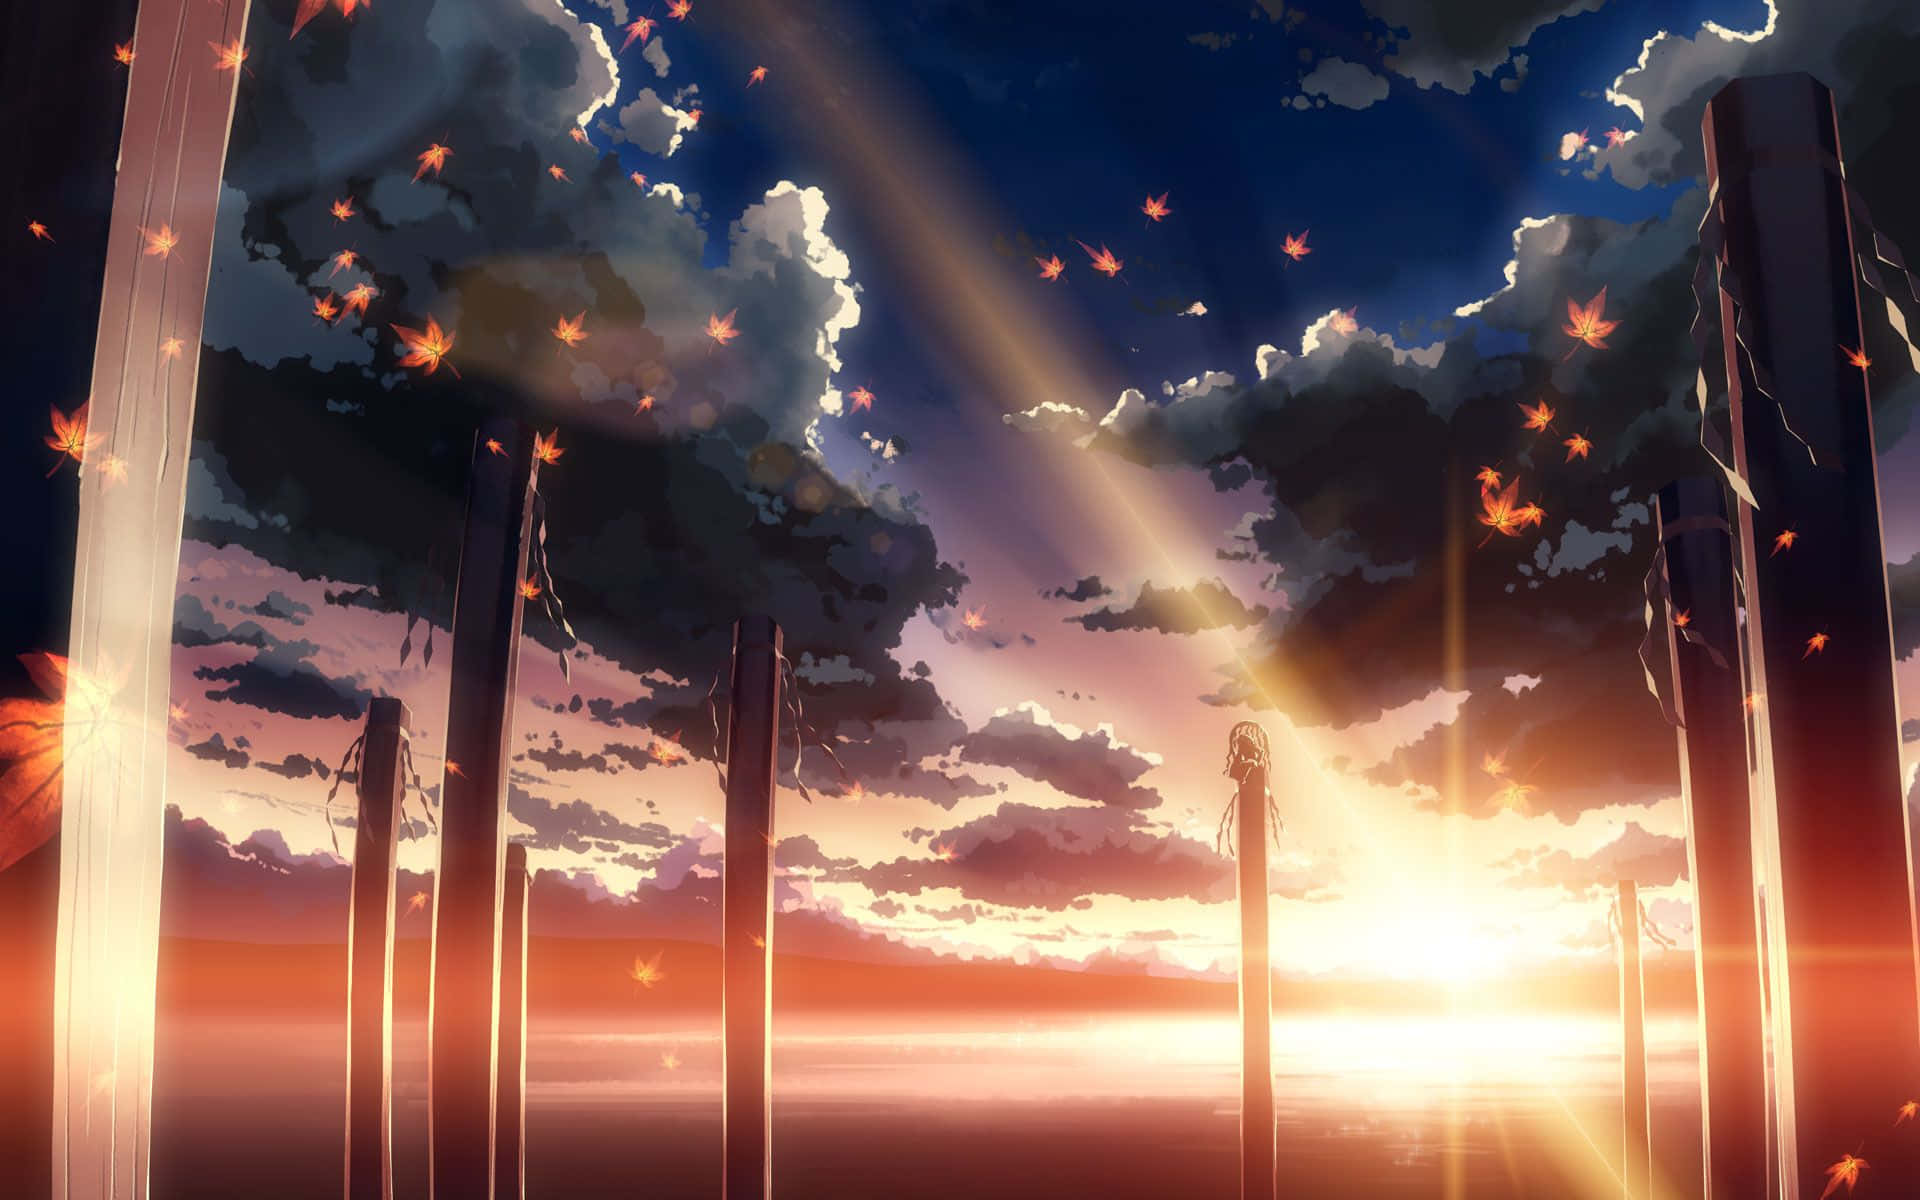 Two people come together in the rain in the emotional anime film 5 Centimeters Per Second